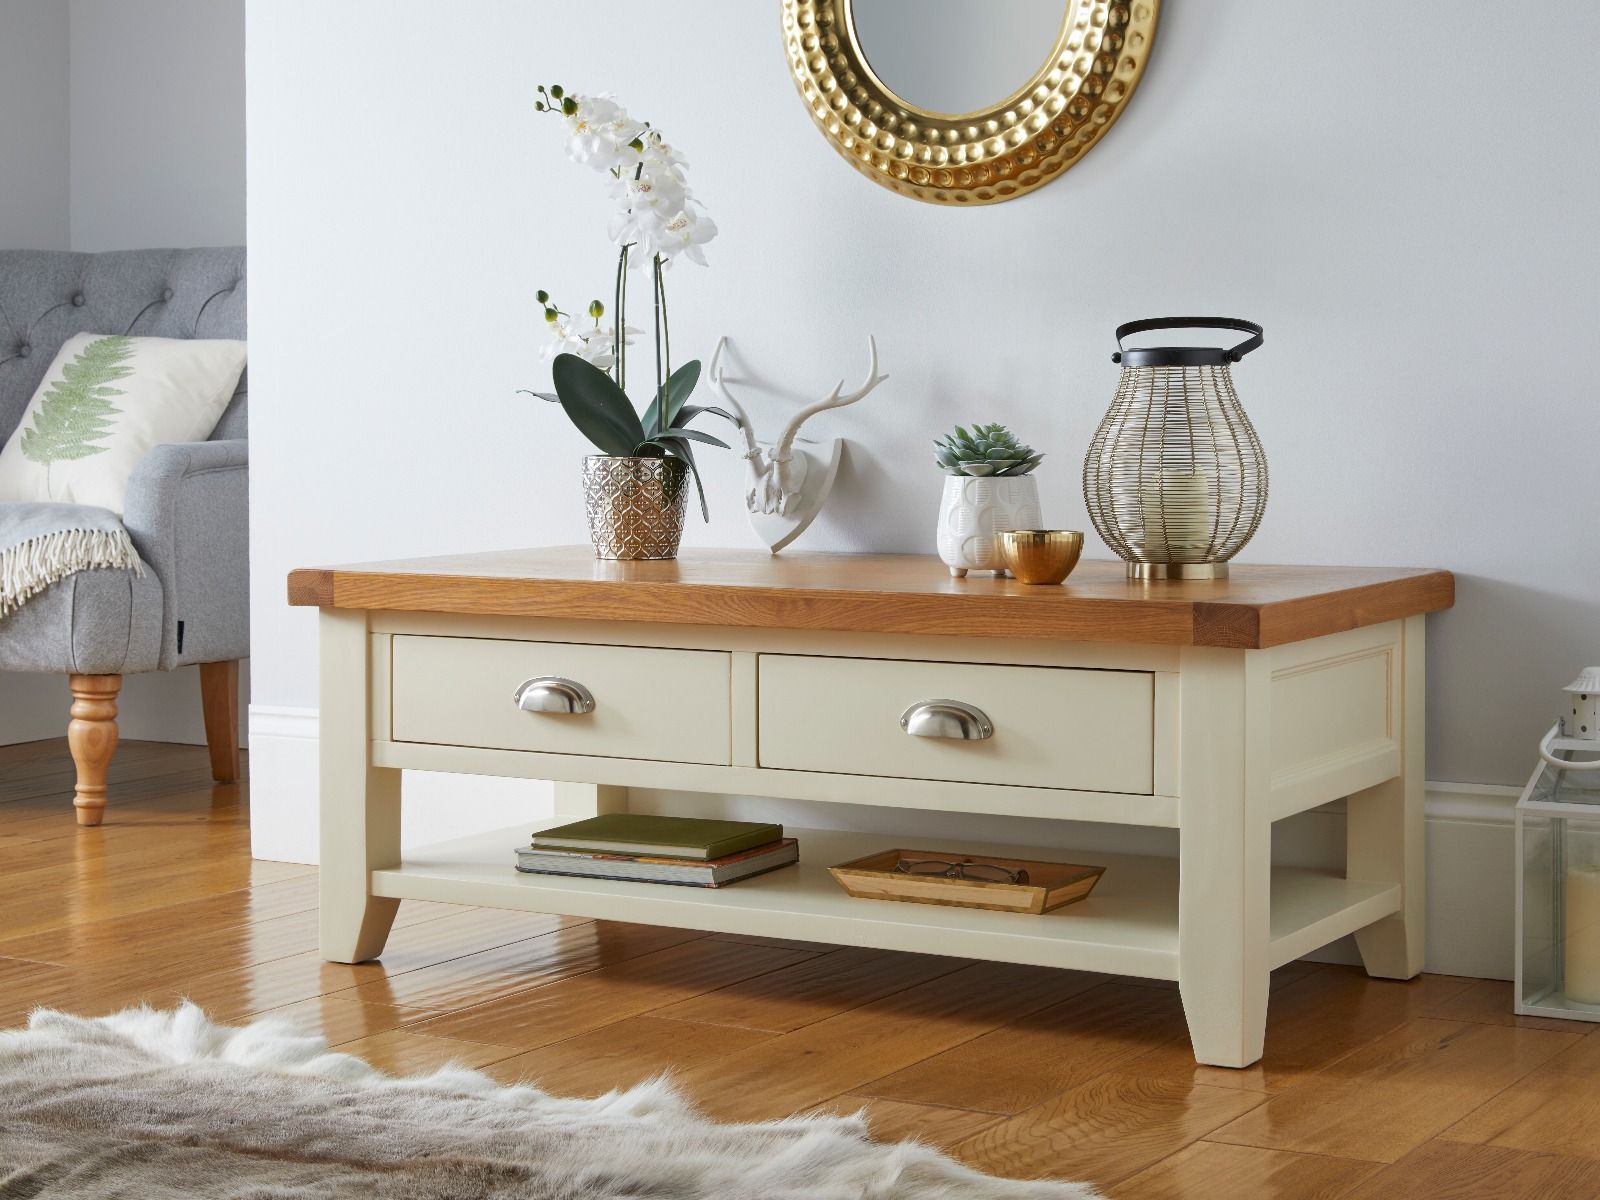 Country Cottage Cream Painted Large 4 Drawer Oak Coffee Table With Shelf - 10% OFF CODE SAVE